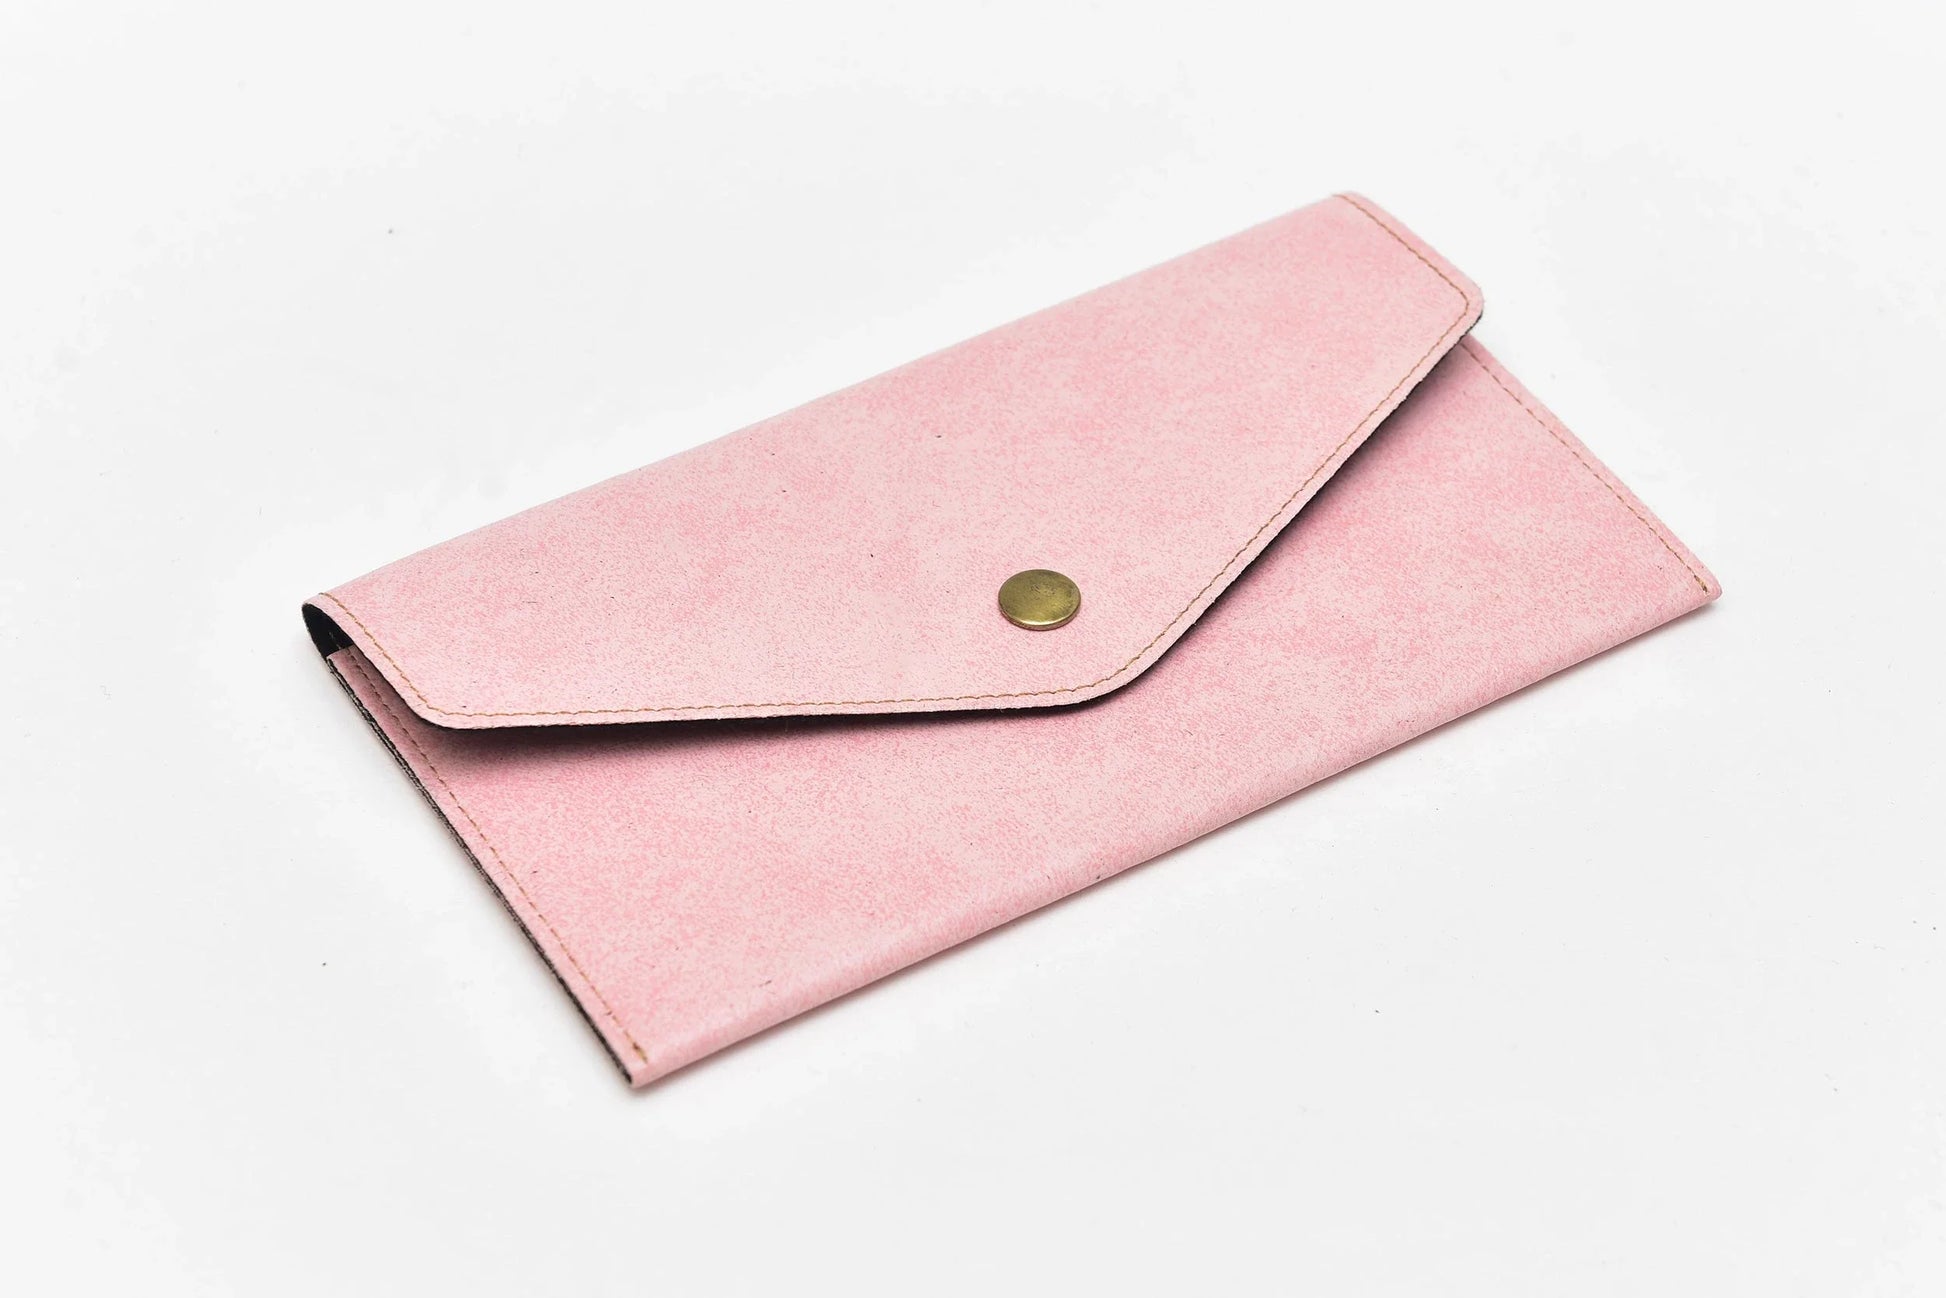 Add a touch of elegance to your everyday look with this personalized leather clutch. The perfect size for all your essentials and customized to your liking.